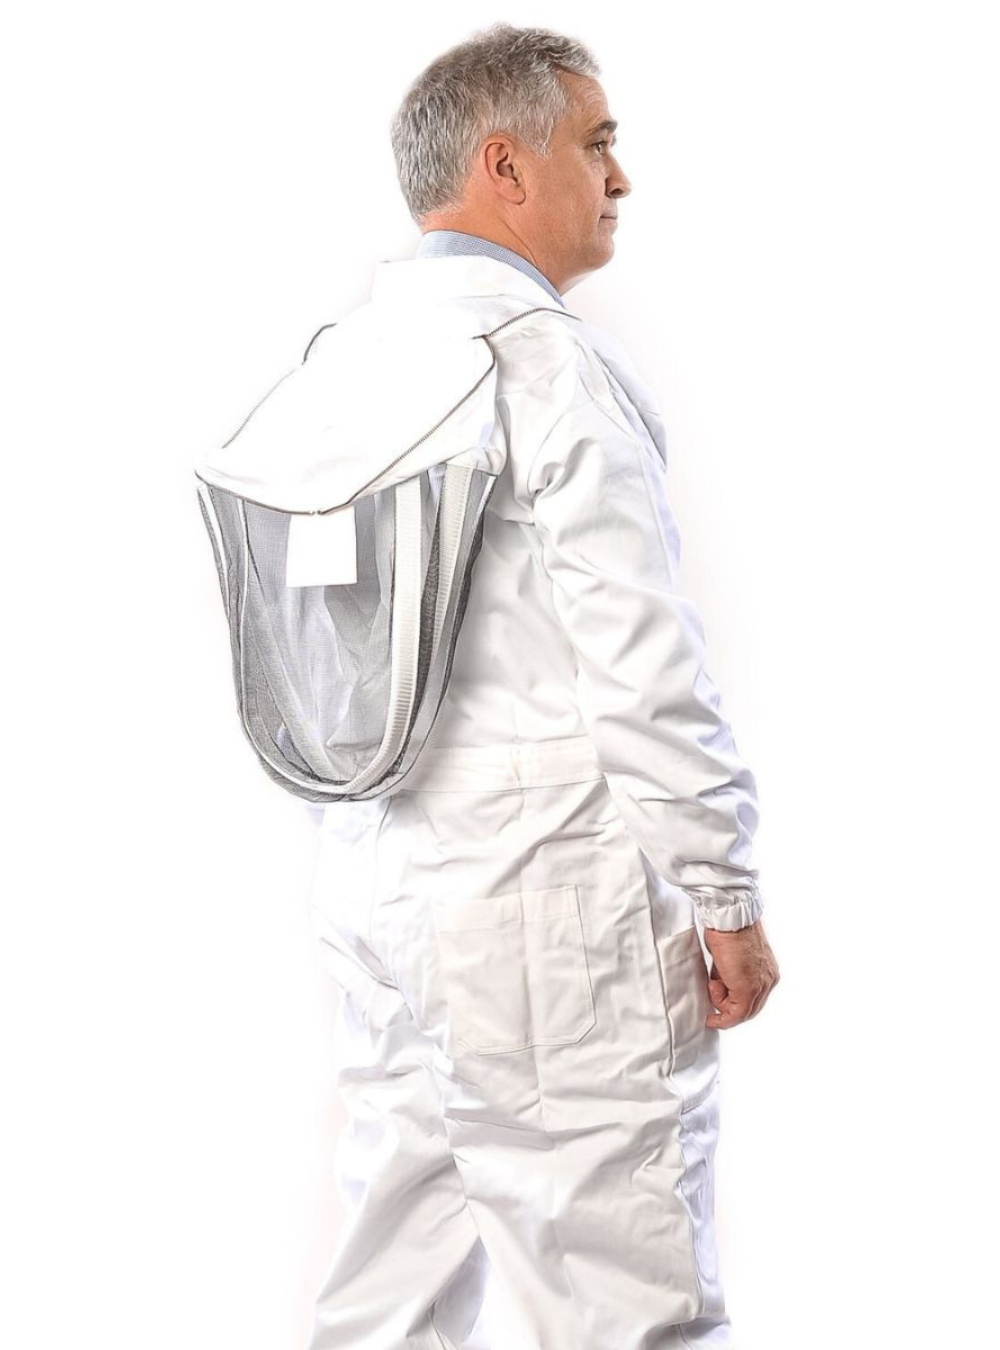 A side Profile of Astro White Cotton bee suit featuring a white cotton design and a ventilated fencing veil.